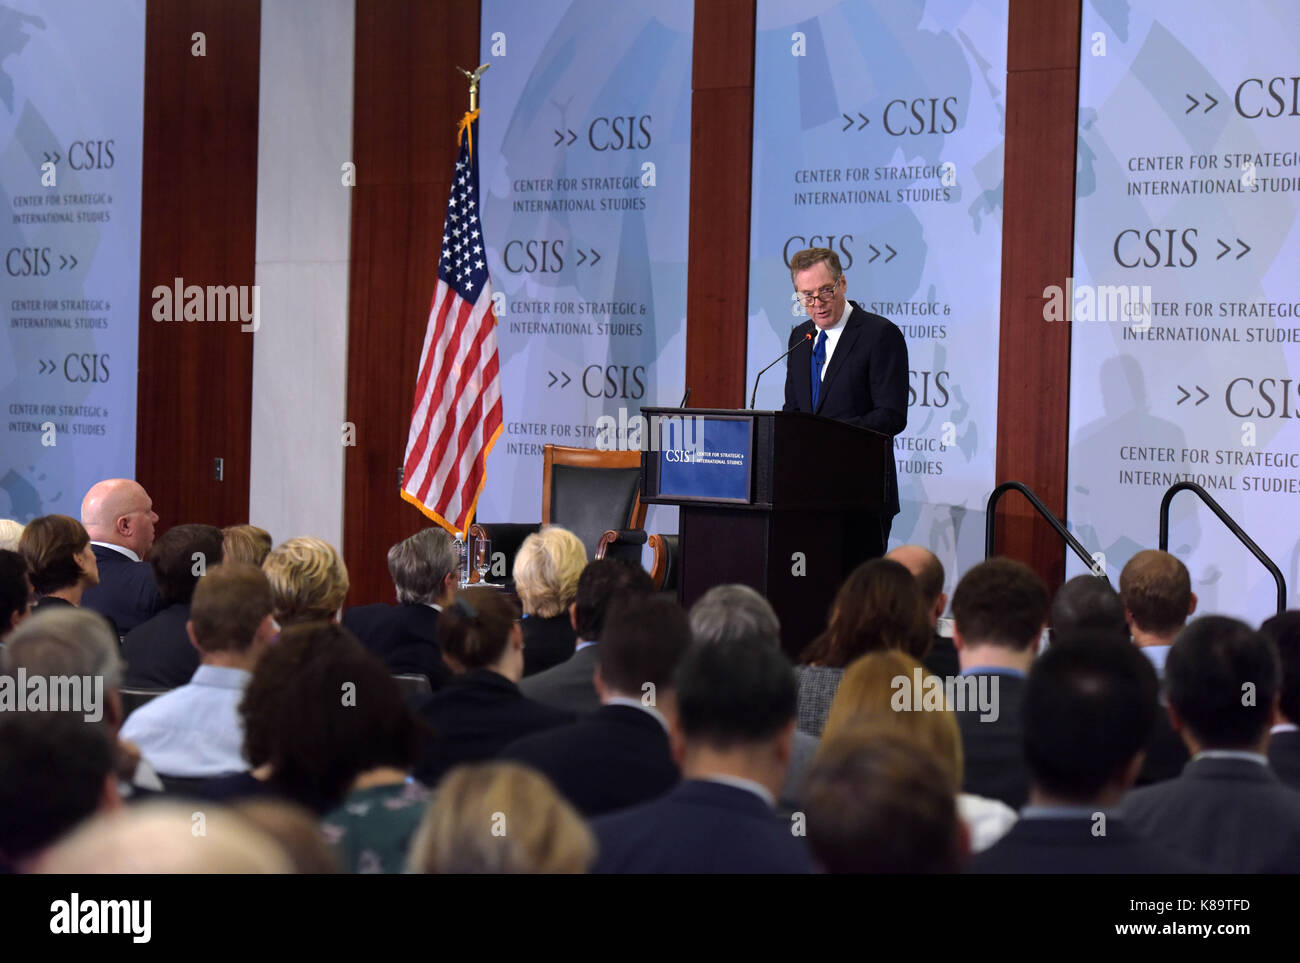 Washington, DC, USA. 18th Sep, 2017. U.S. Trade Representative (USTR) Robert Lighthizer delivers remarks at the Center for Strategic and International Studies (CSIS) in Washington, DC, the United States, on Sept. 18, 2017. Robert Lighthizer said here on Monday that reducing trade deficits is one of the Trump administration's trade policy priorities. Credit: Yin Bogu/Xinhua/Alamy Live News Stock Photo